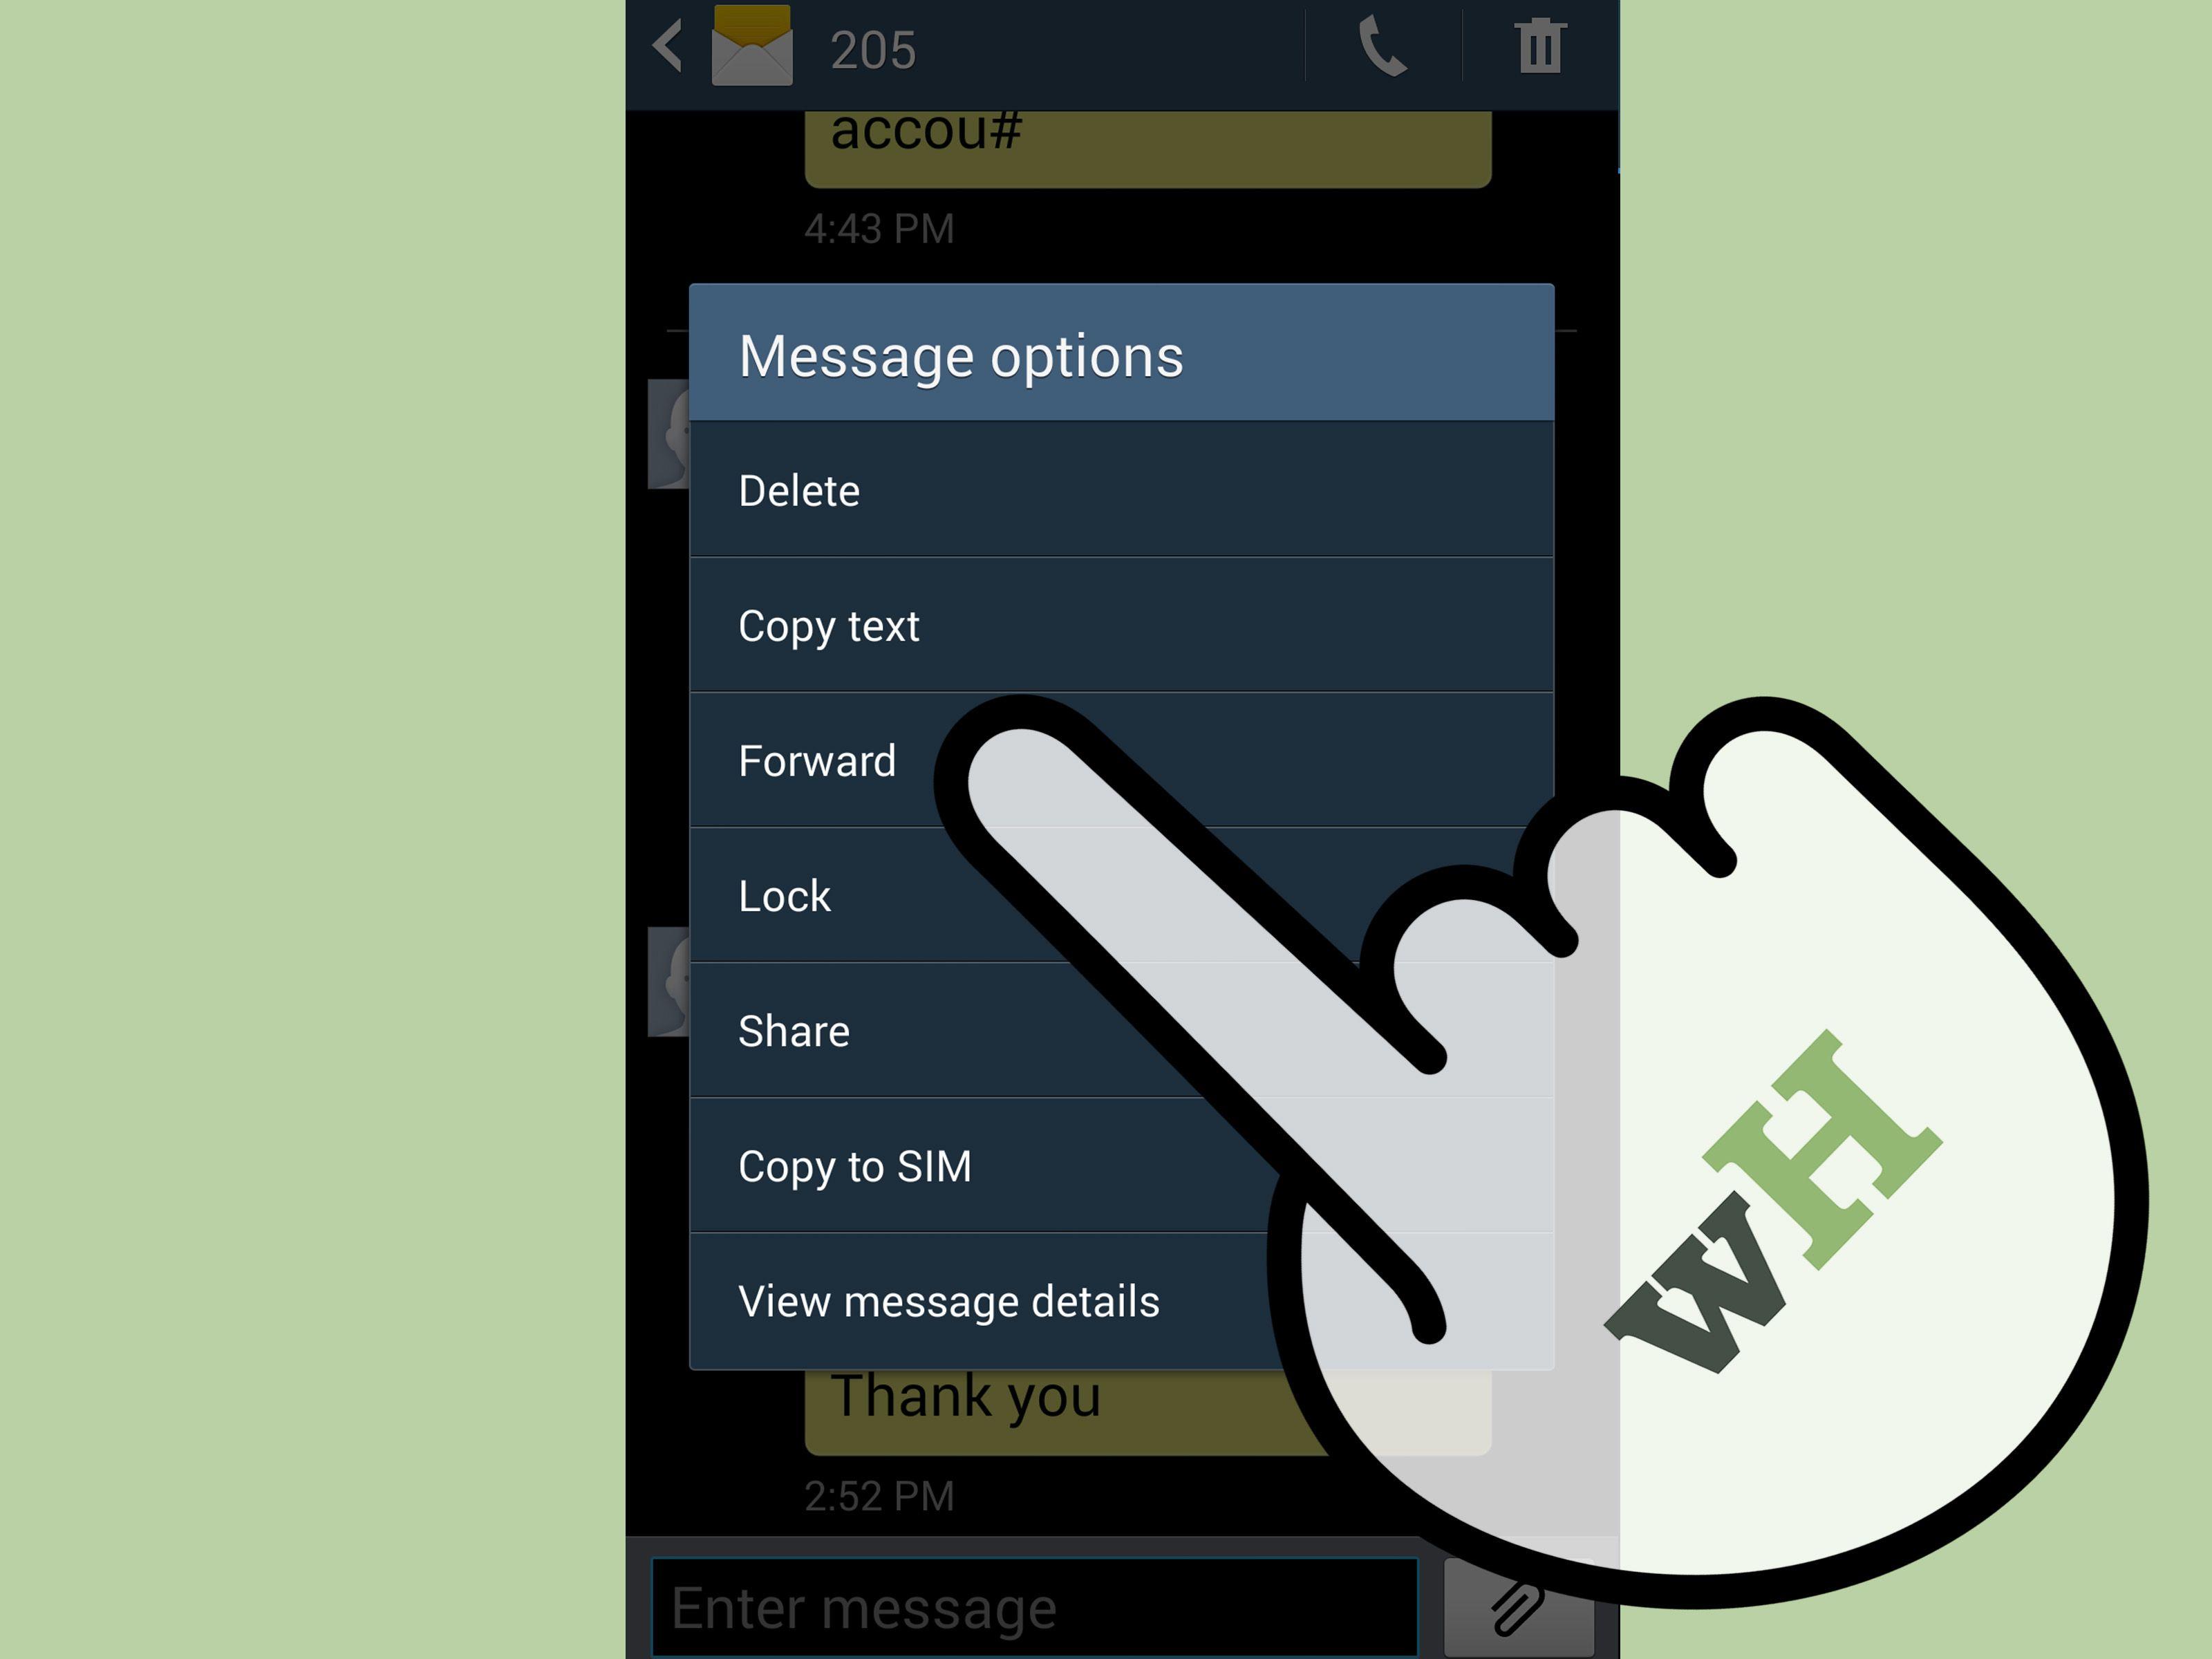 Block Phone Logo - How to Block Mobile Phone Spam: 7 Steps (with Pictures) - wikiHow